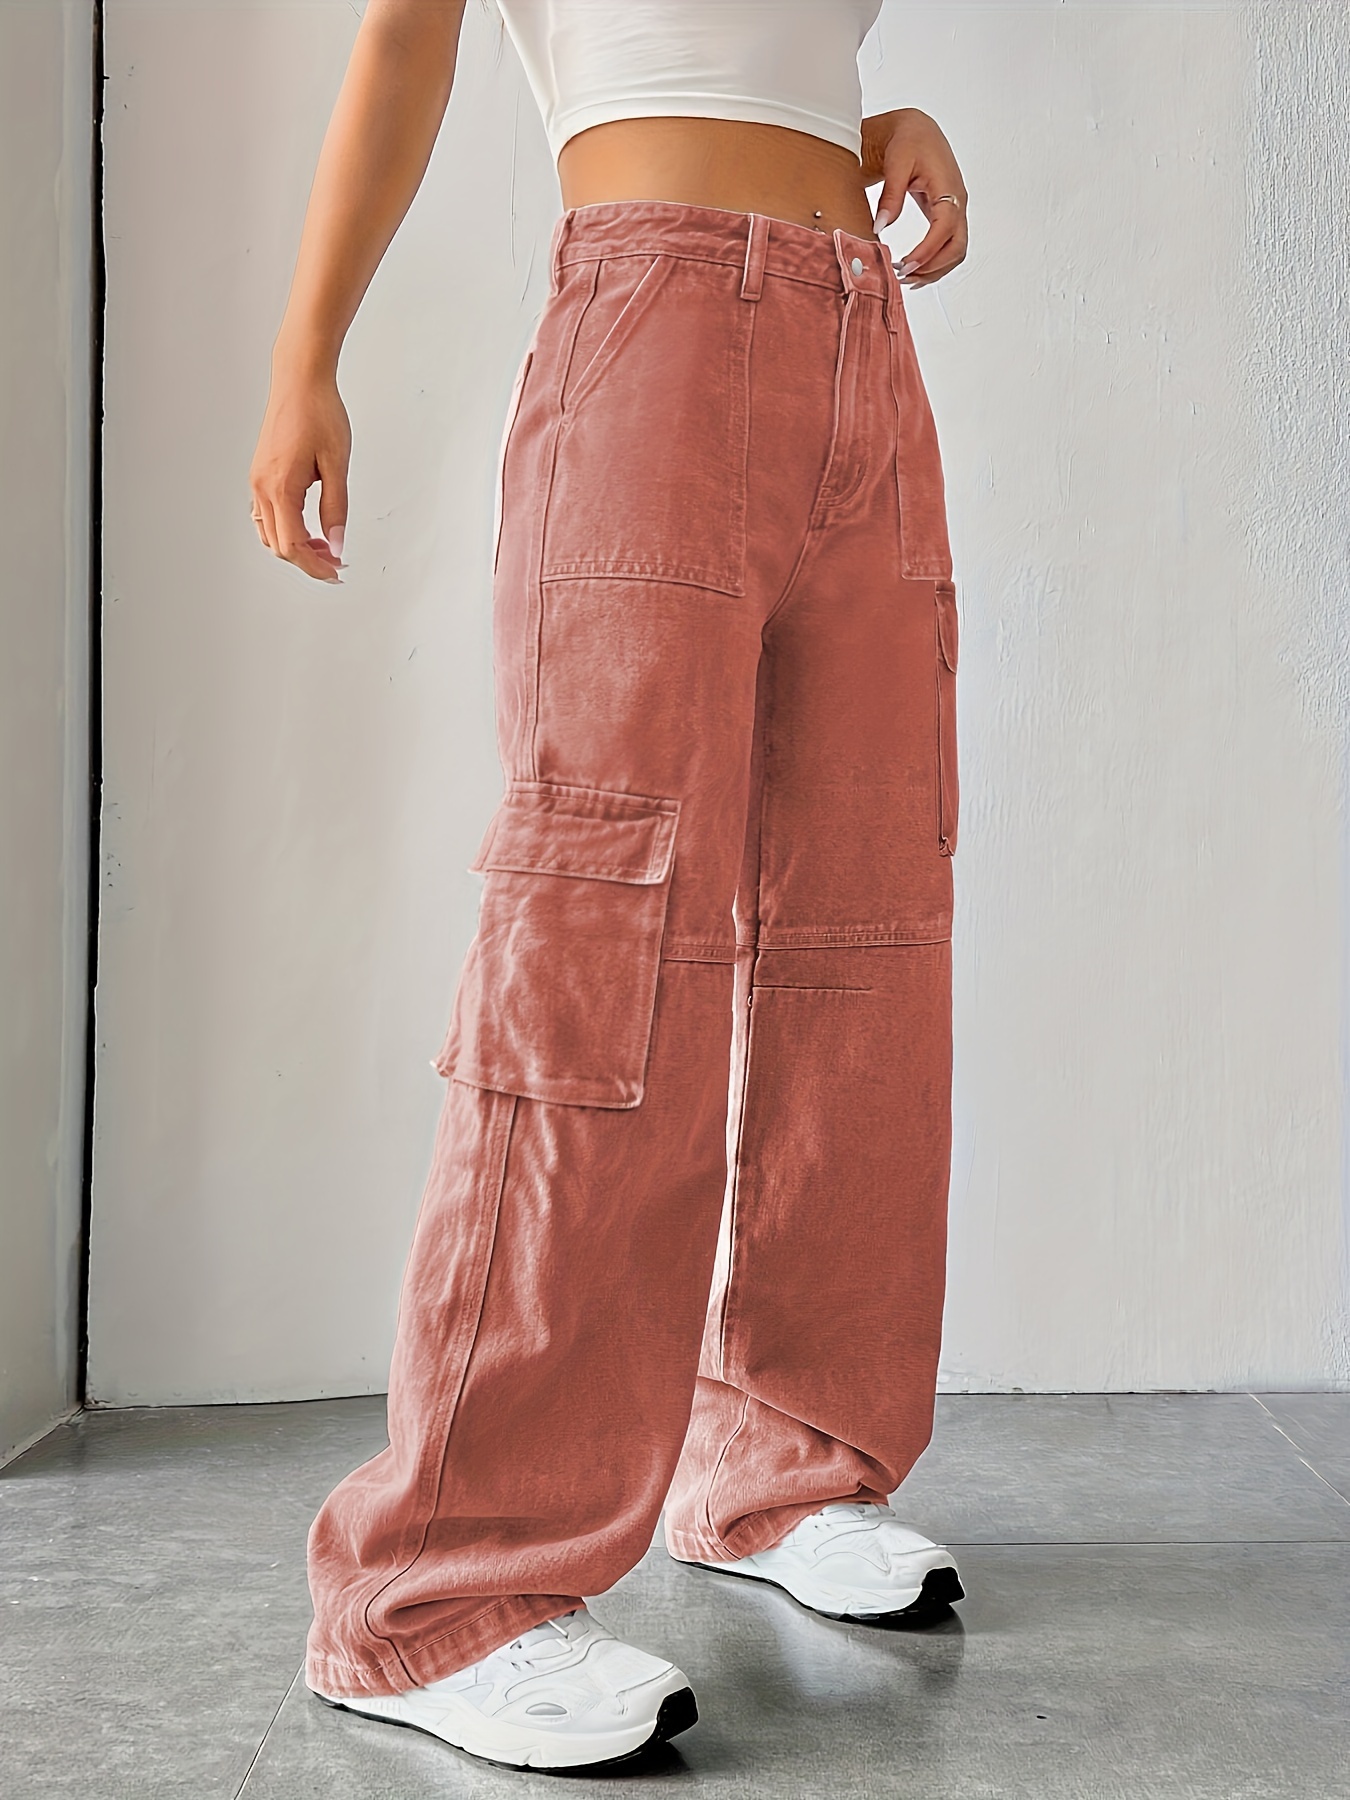 Flap Pocket Side Cargo Trousers  Pants for women, Cargo pants women, High  waisted pants